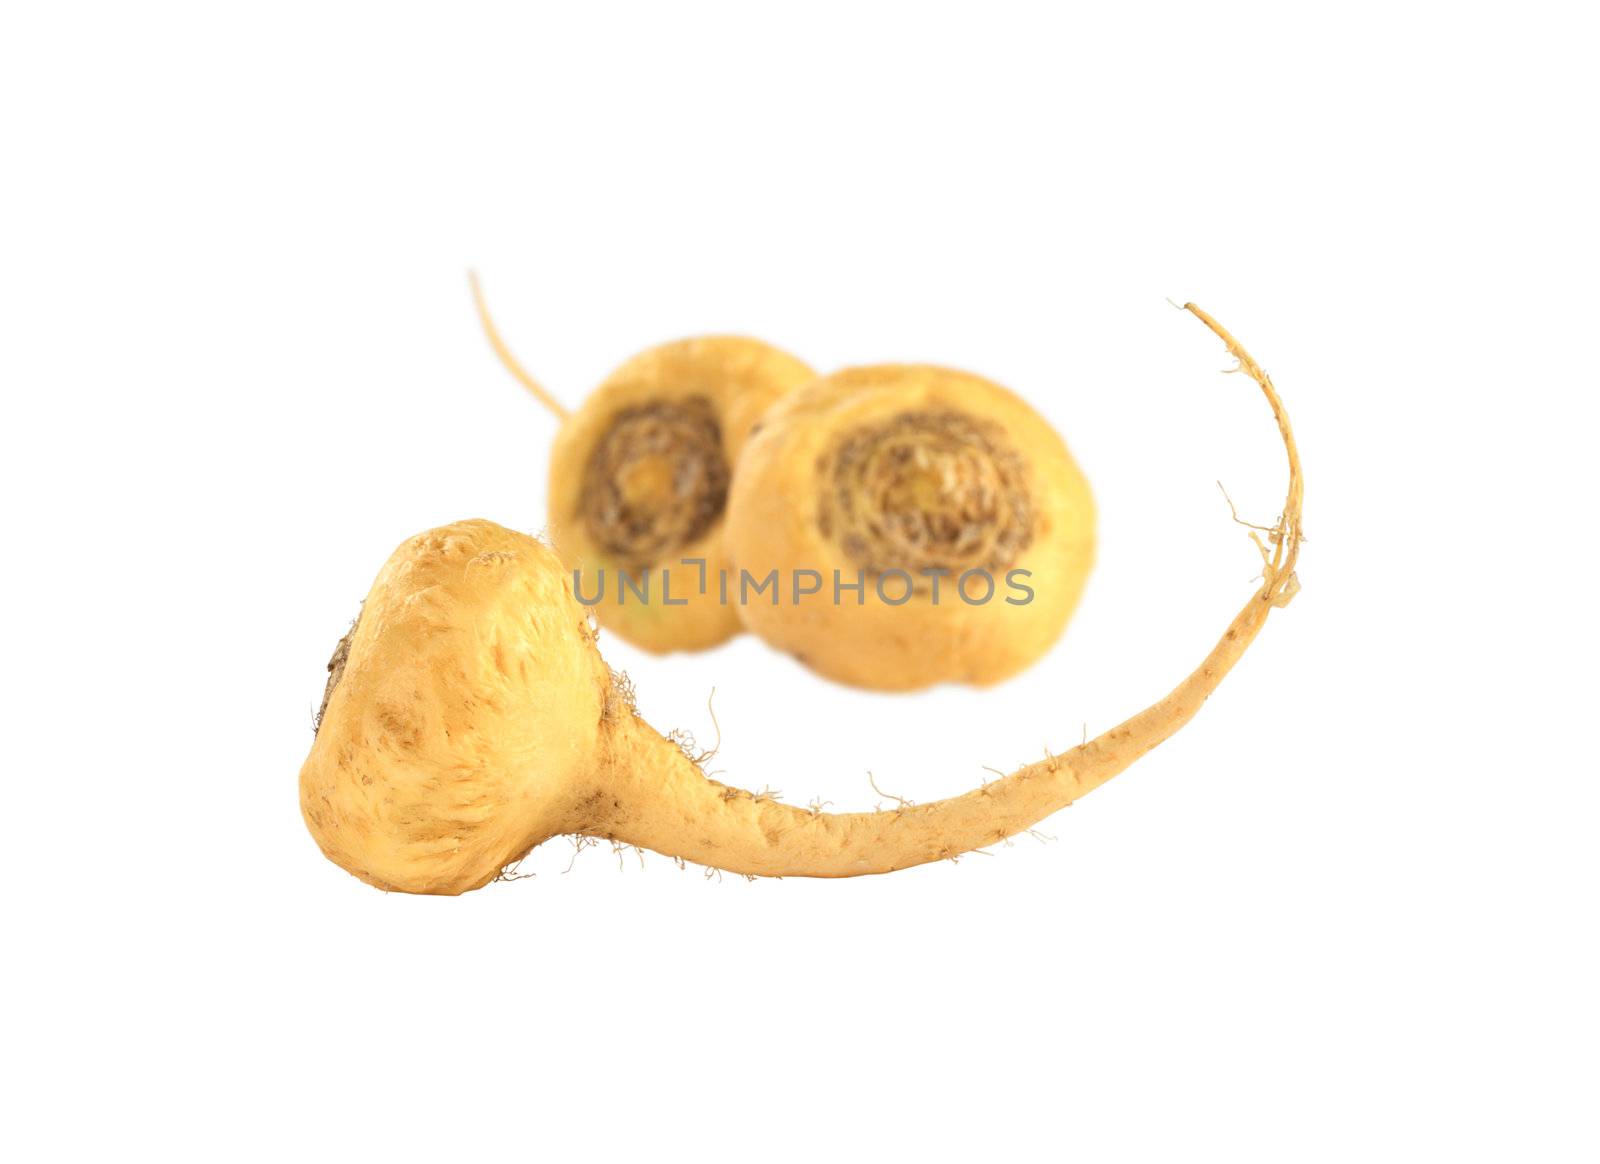 Peruvian Ginseng (Sp. Maca, lat. Lepidium meyenii) which is widely used in Peru for its various health effects and high nutritional value (Isolated) (Selective Focus, Focus on the root in the front)